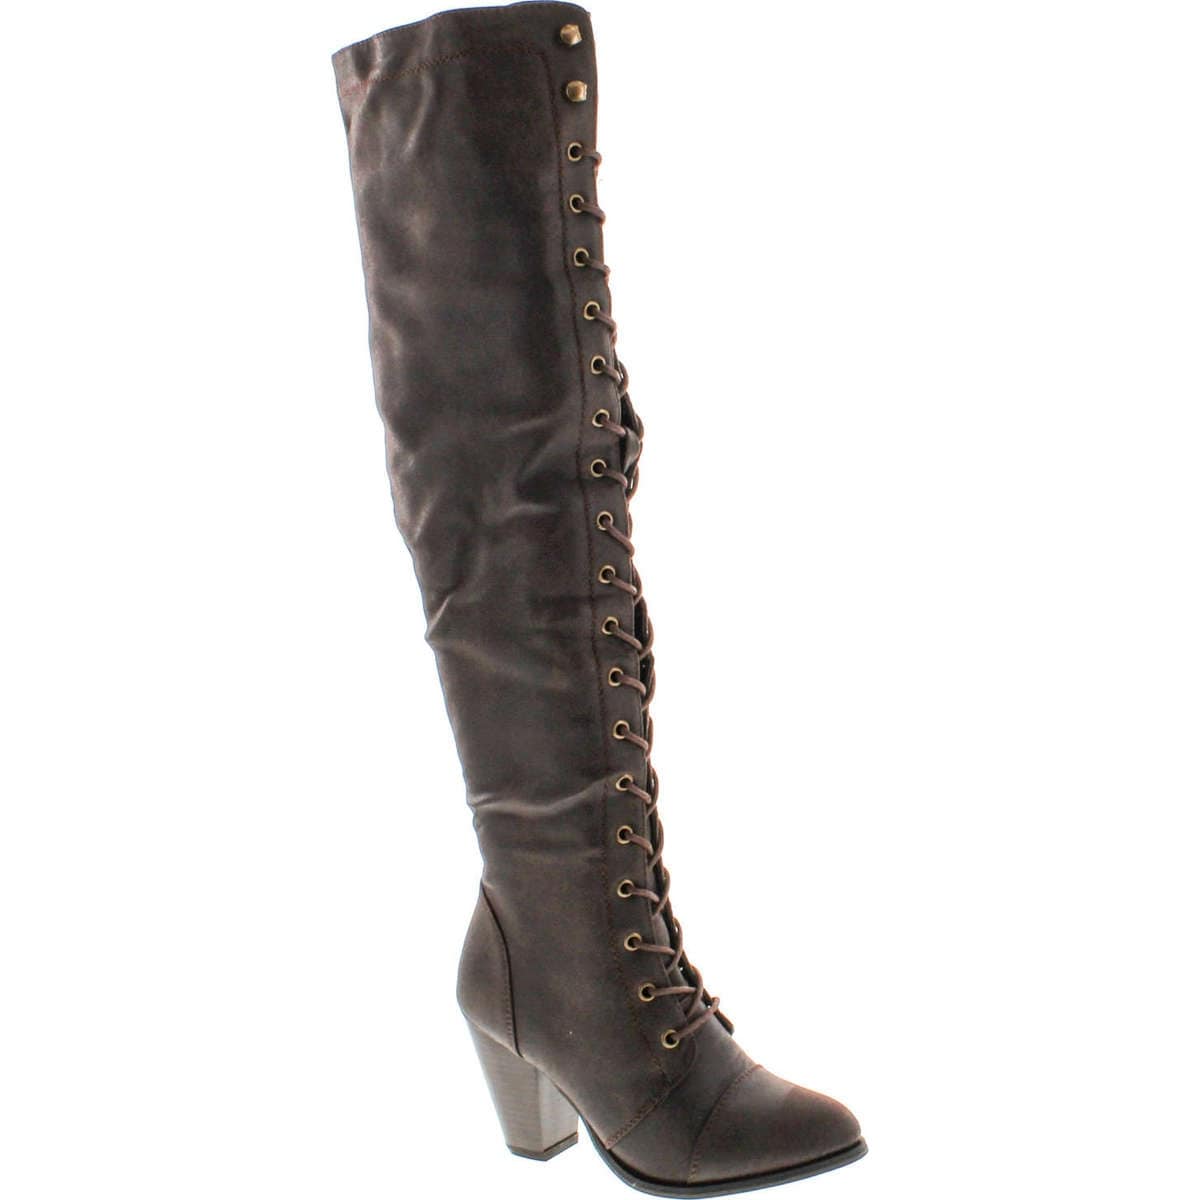 The Knee Brown High Riding Boots 